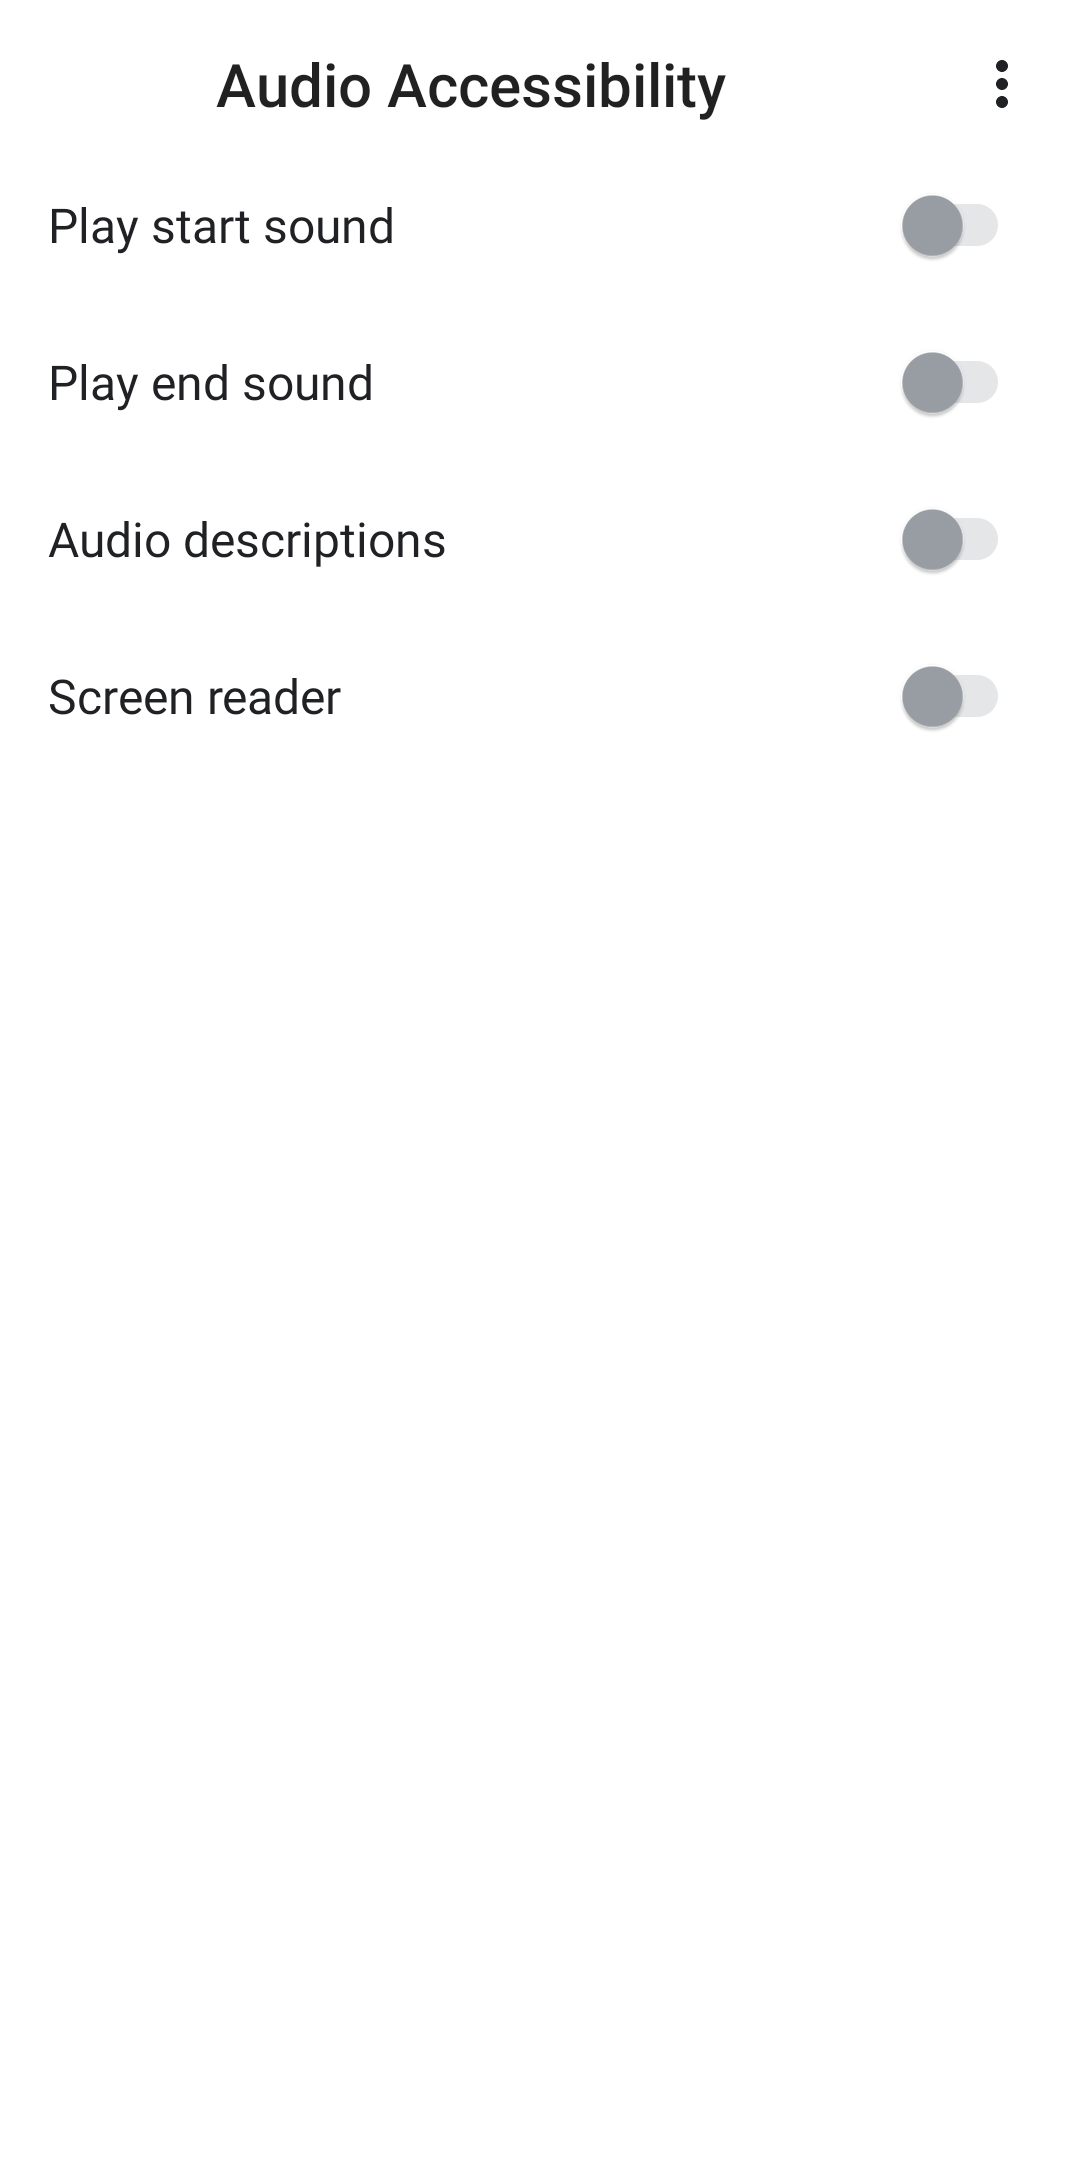 Screenshot shows the Audio Accessibility settings page in the Google Home app.